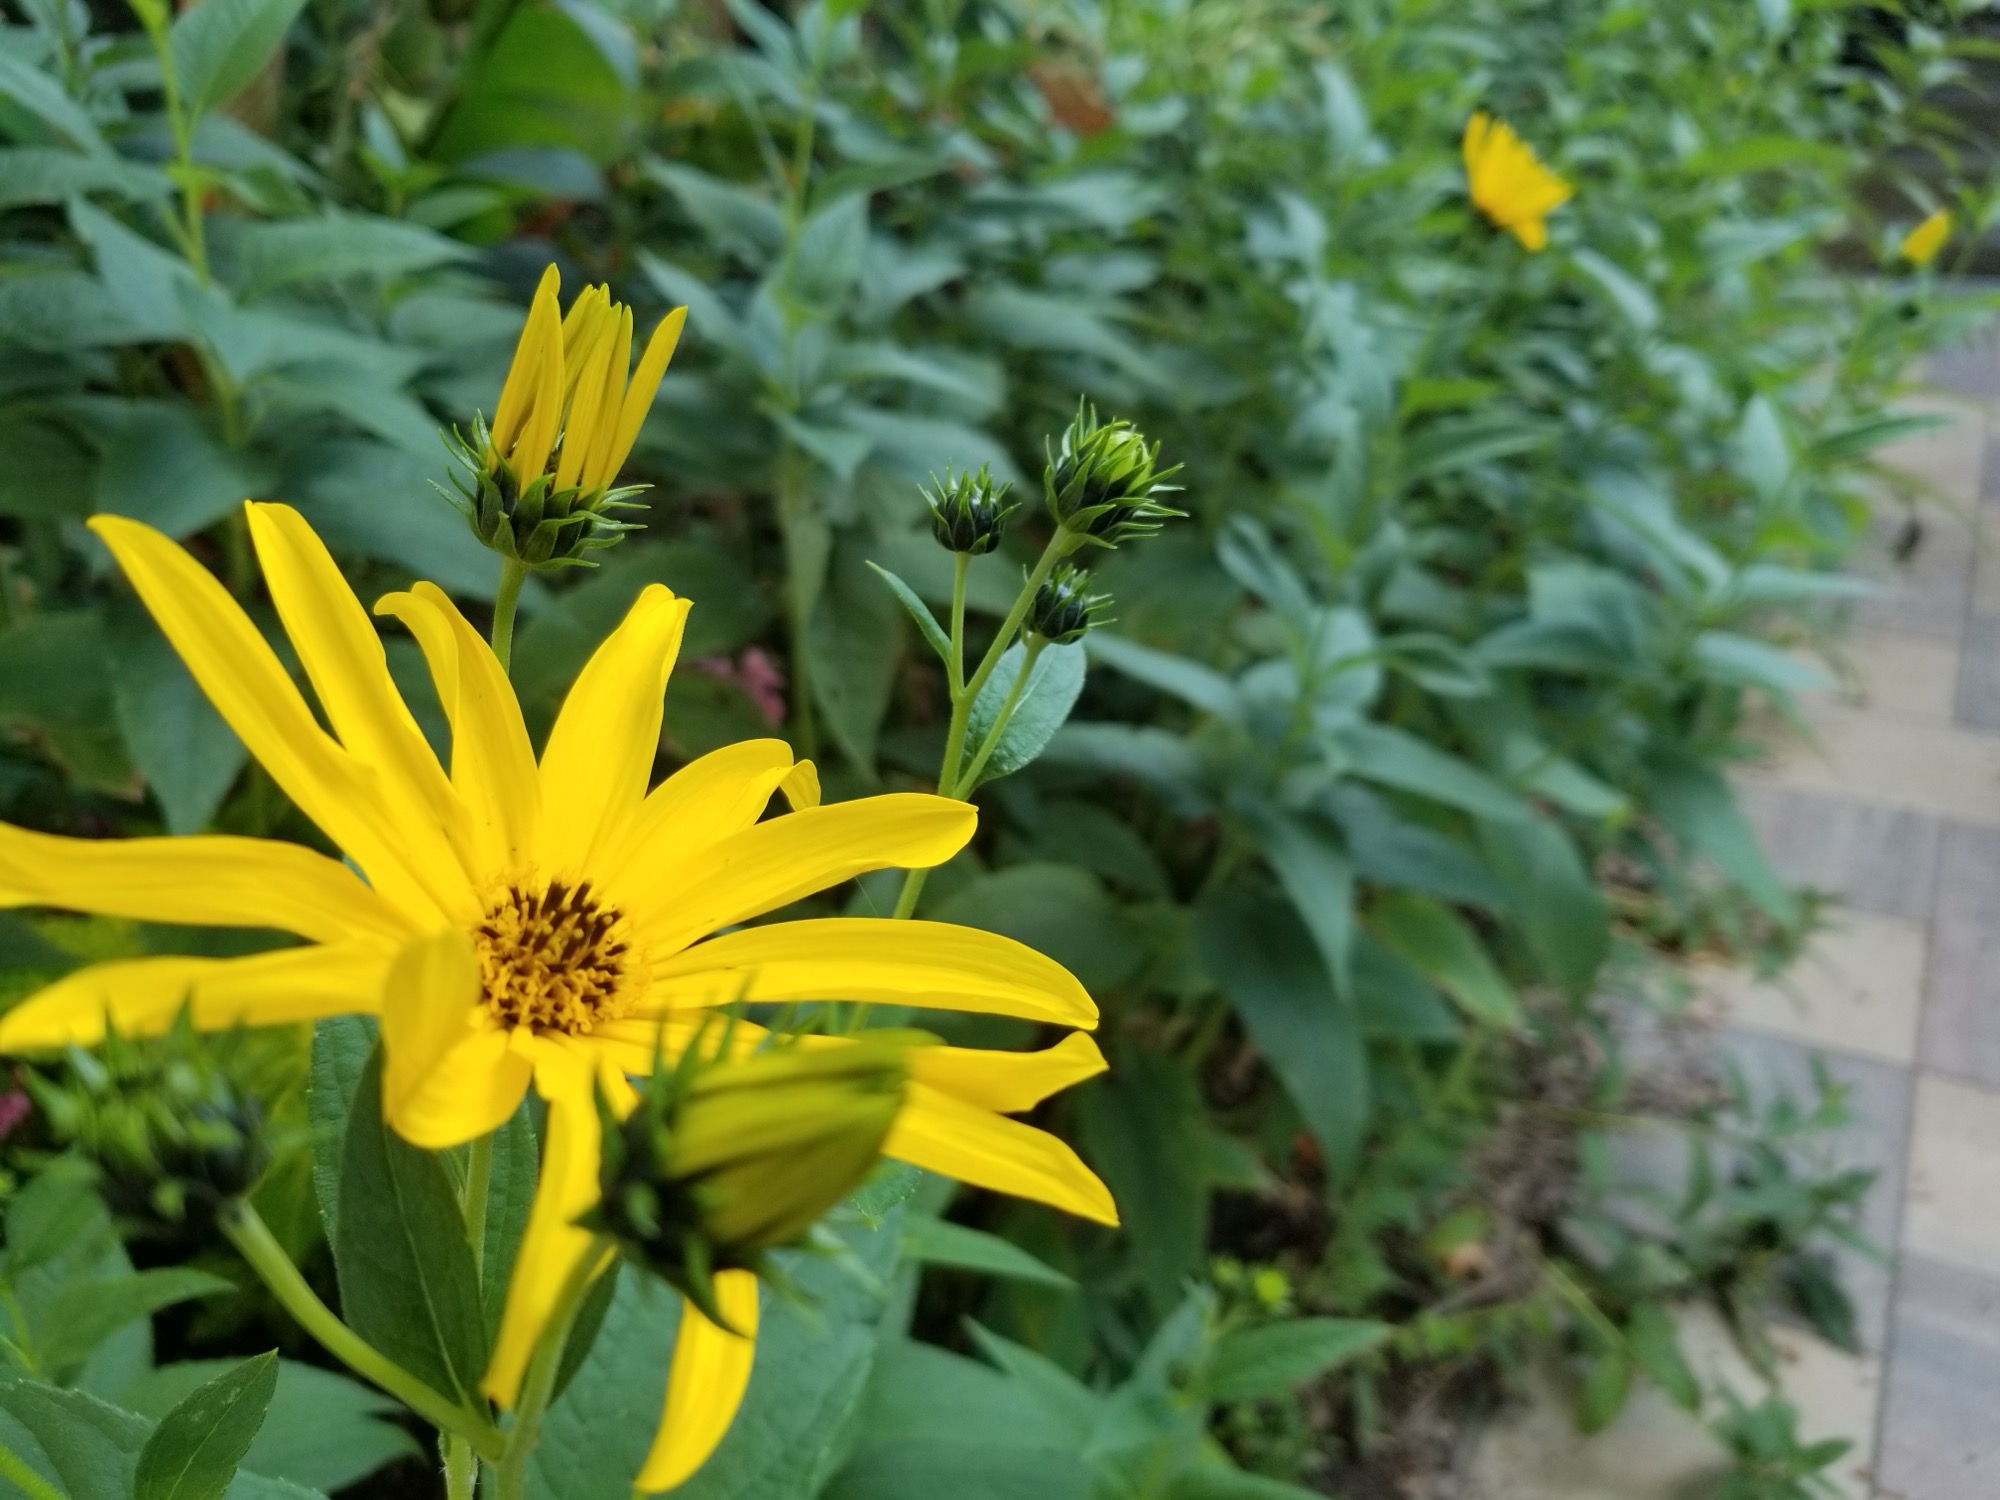 Yellow flowers blooming from within a rain garden